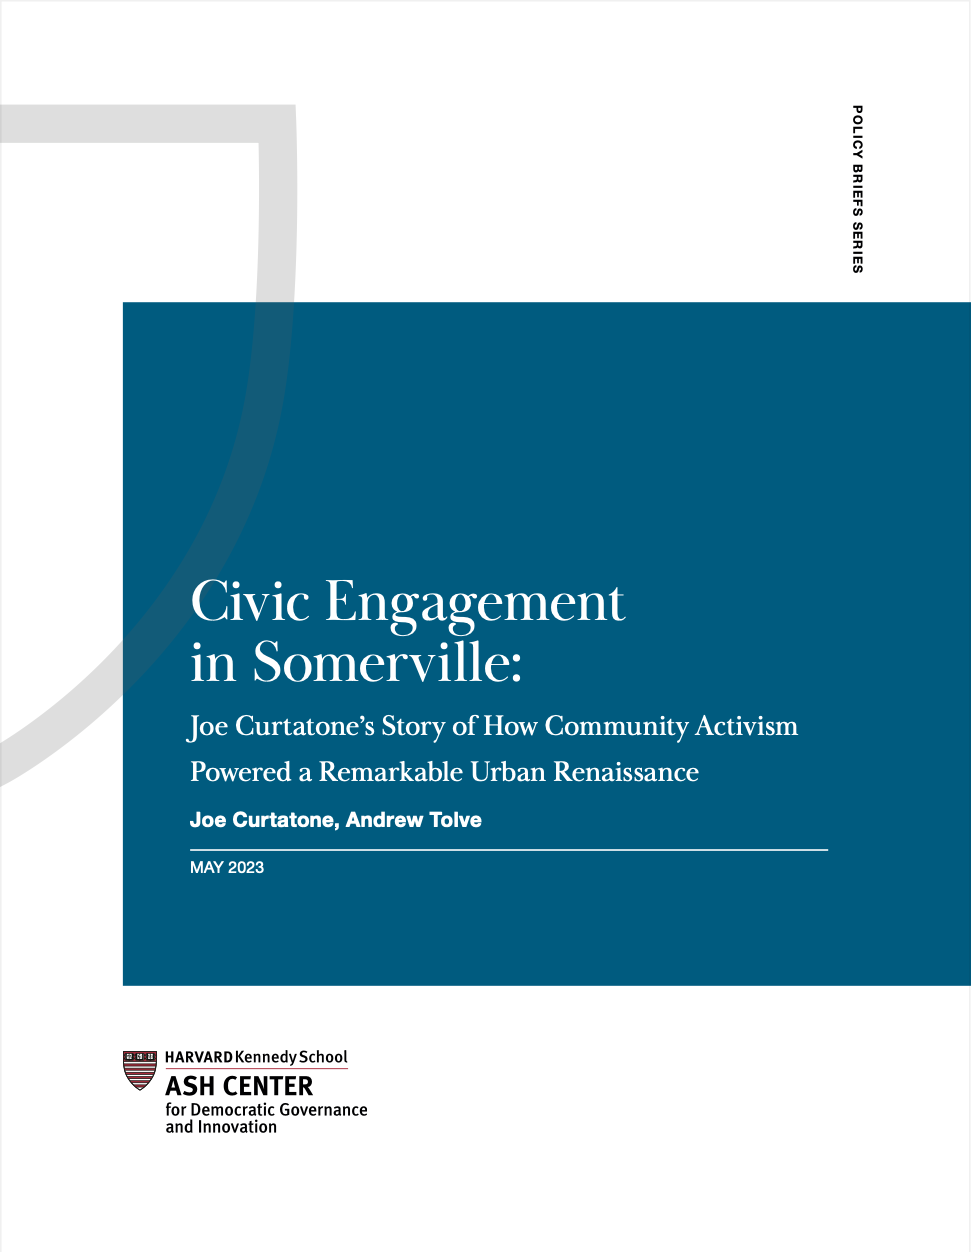 Civic Engagement in Somerville: Joe Curtatone’s Story of How Community Activism Powered a Remarkable Urban Renaissance